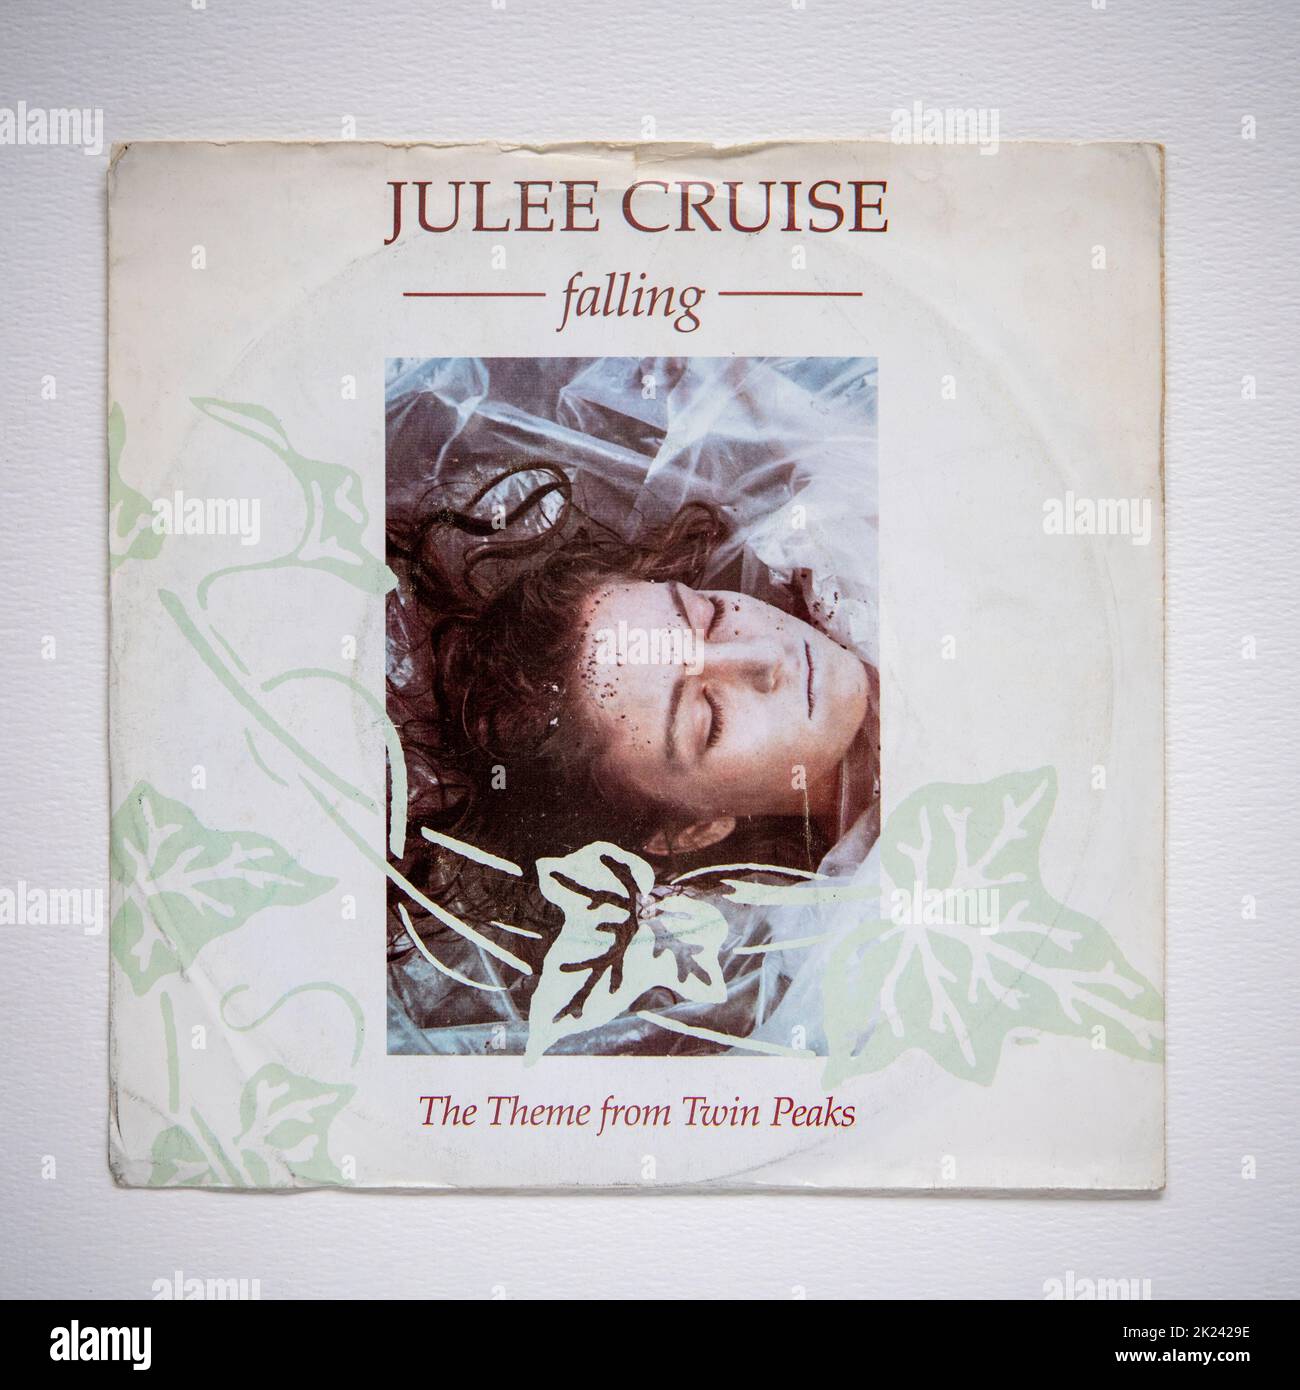 Picture cover of the seven inch single version of Falling by Julee Cruise, which was released in 1990. Used as the theme for TV show Twin Peaks. Stock Photo